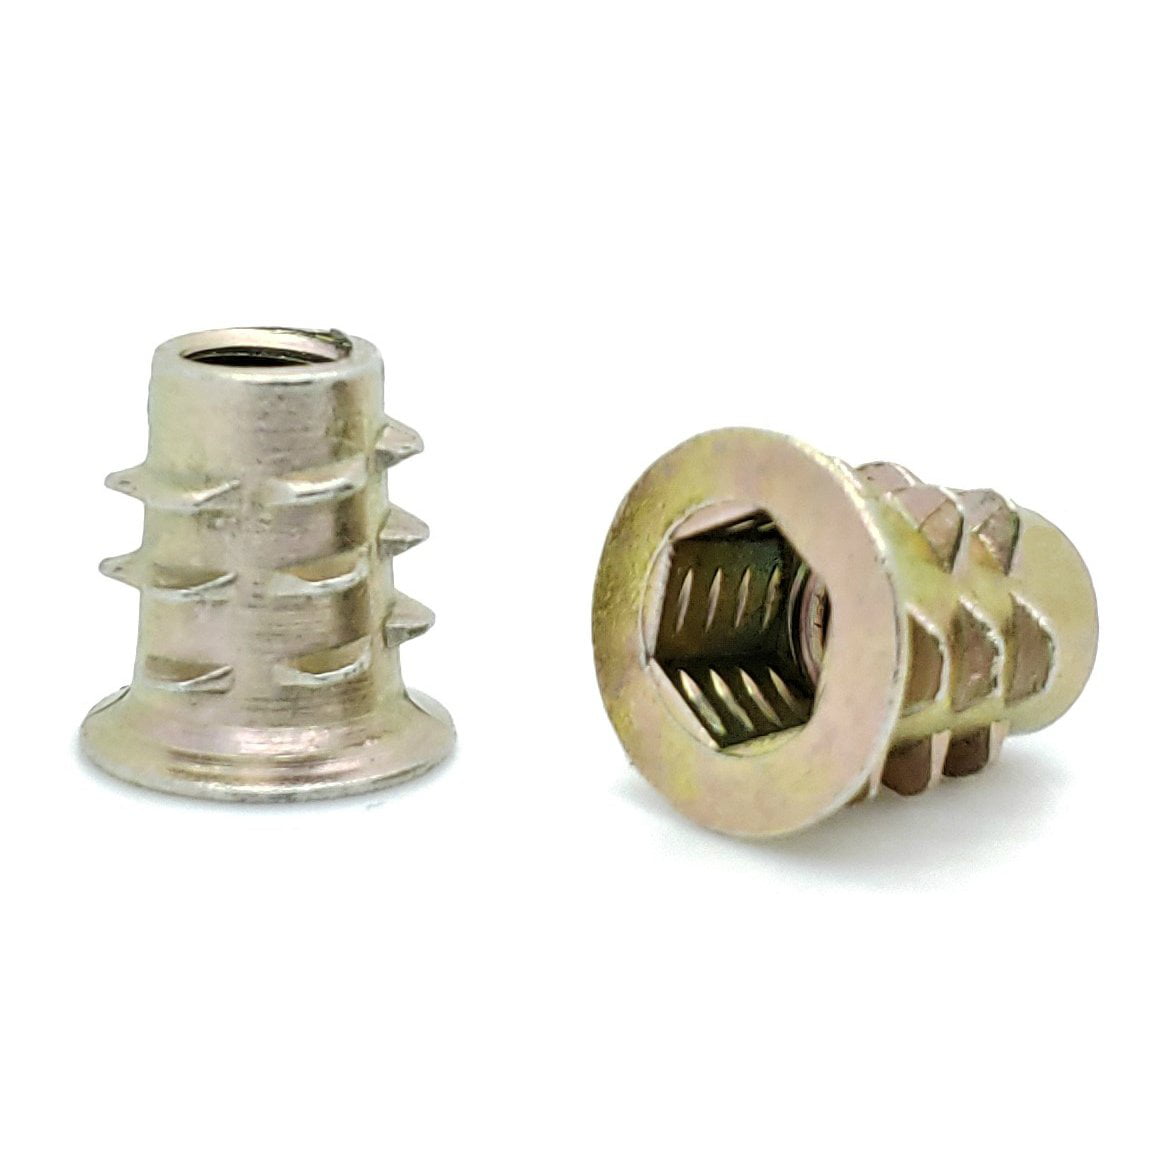 Details about   New 100Pcs Thread Inserts Male Female Reducing Nut Repair Fastener M6x1x2.5 D 